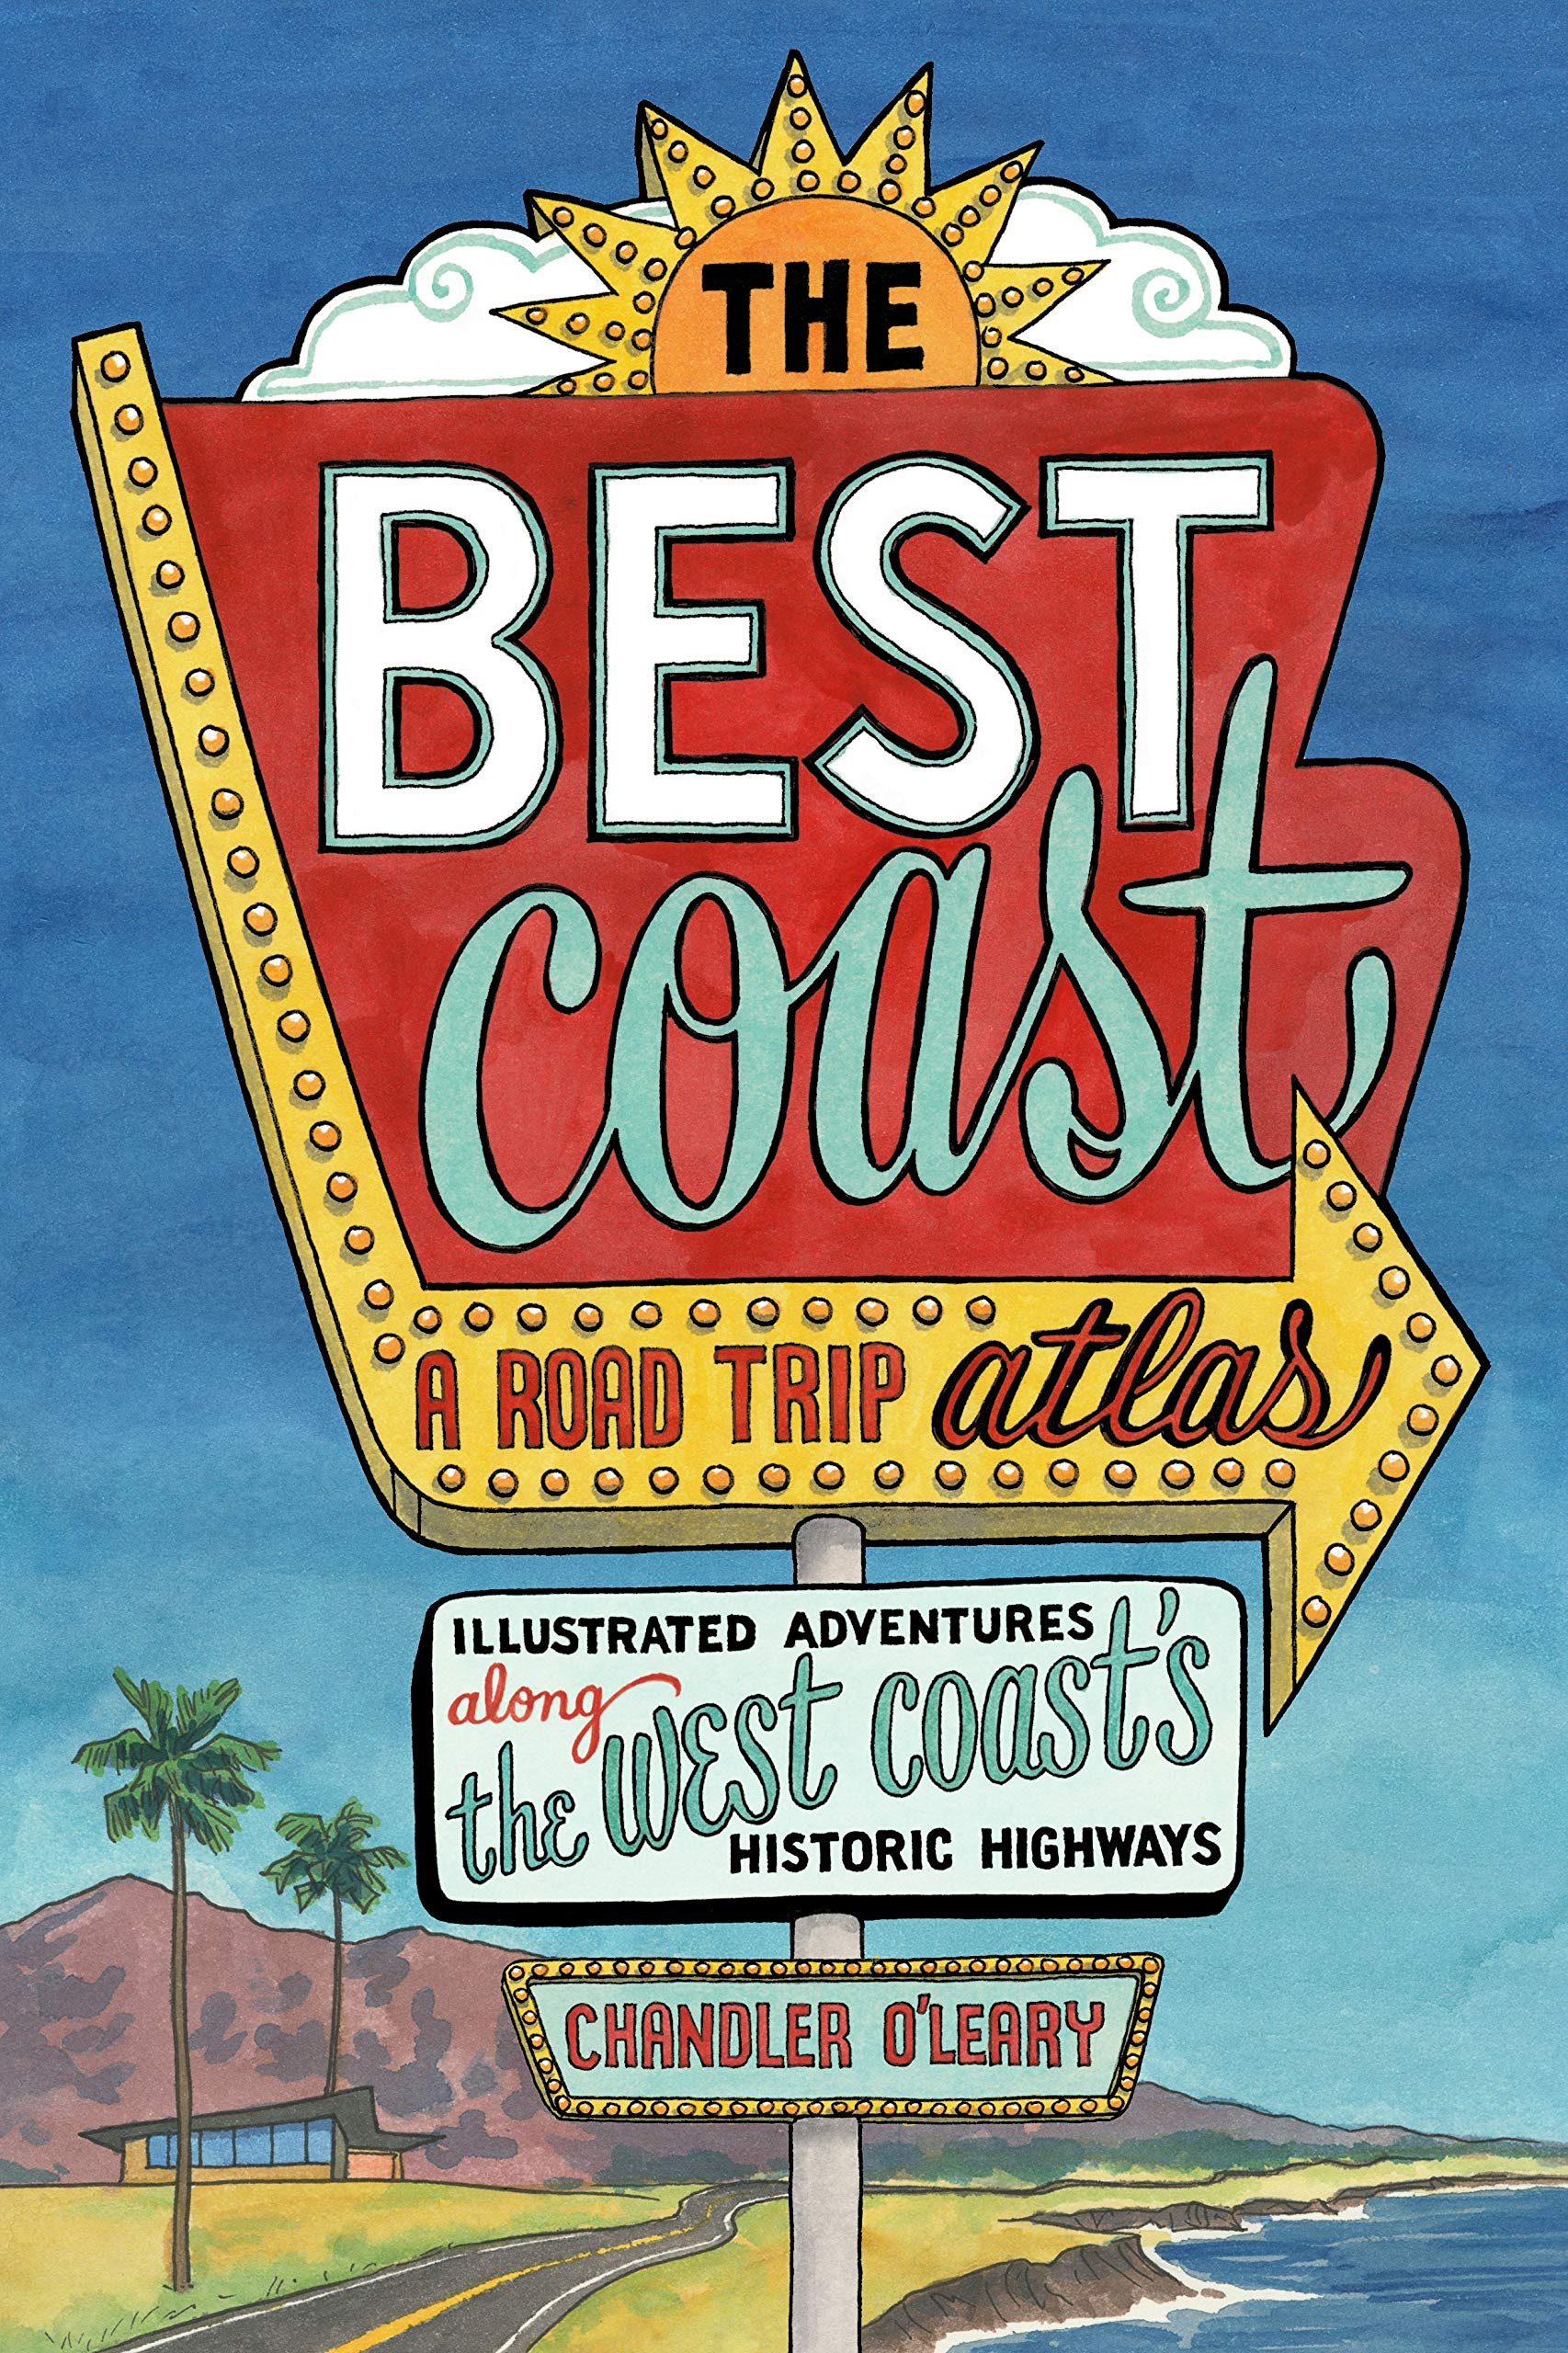 The Best Coast: A Road Trip Atlas: Illustrated Adventures along the West Coast's Historic Highways